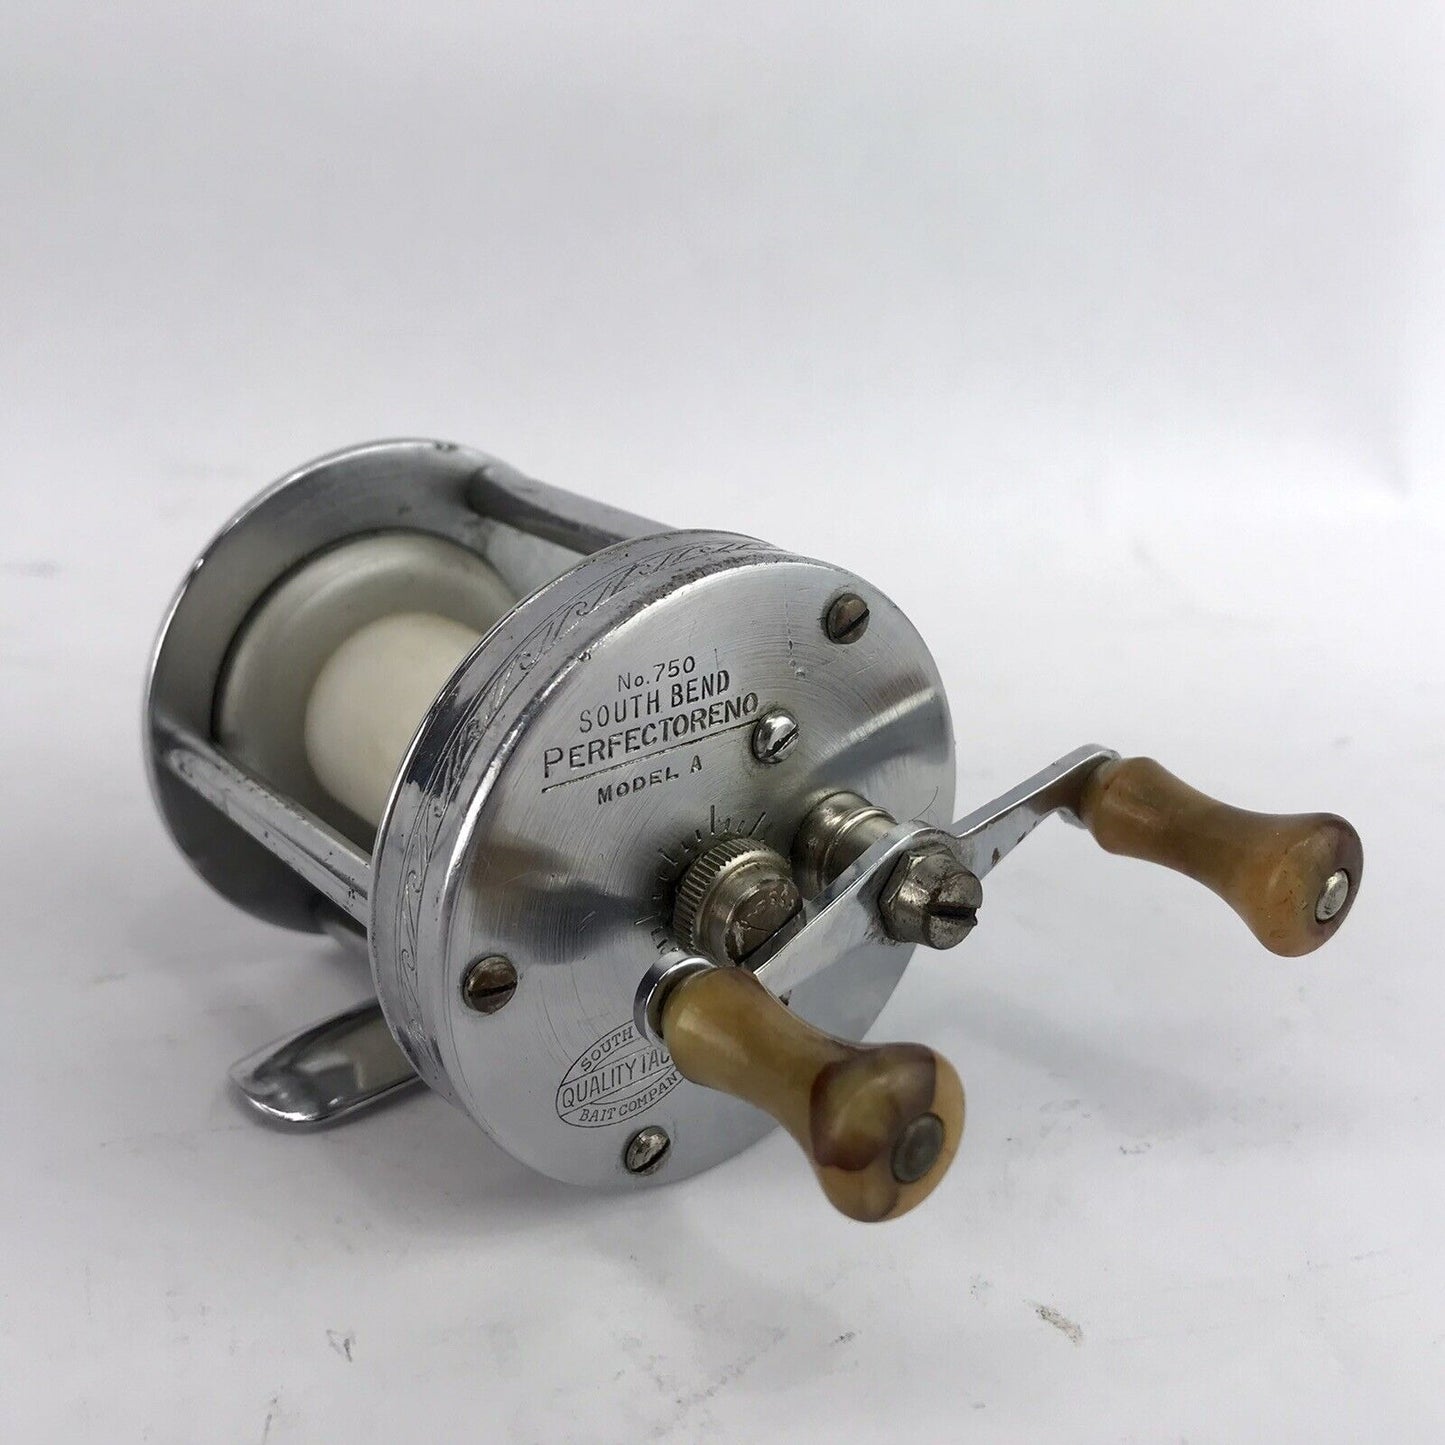 South Bend Perfectoreno Model A Fishing Reel WORKS GREAT! – Sunrise Pickers